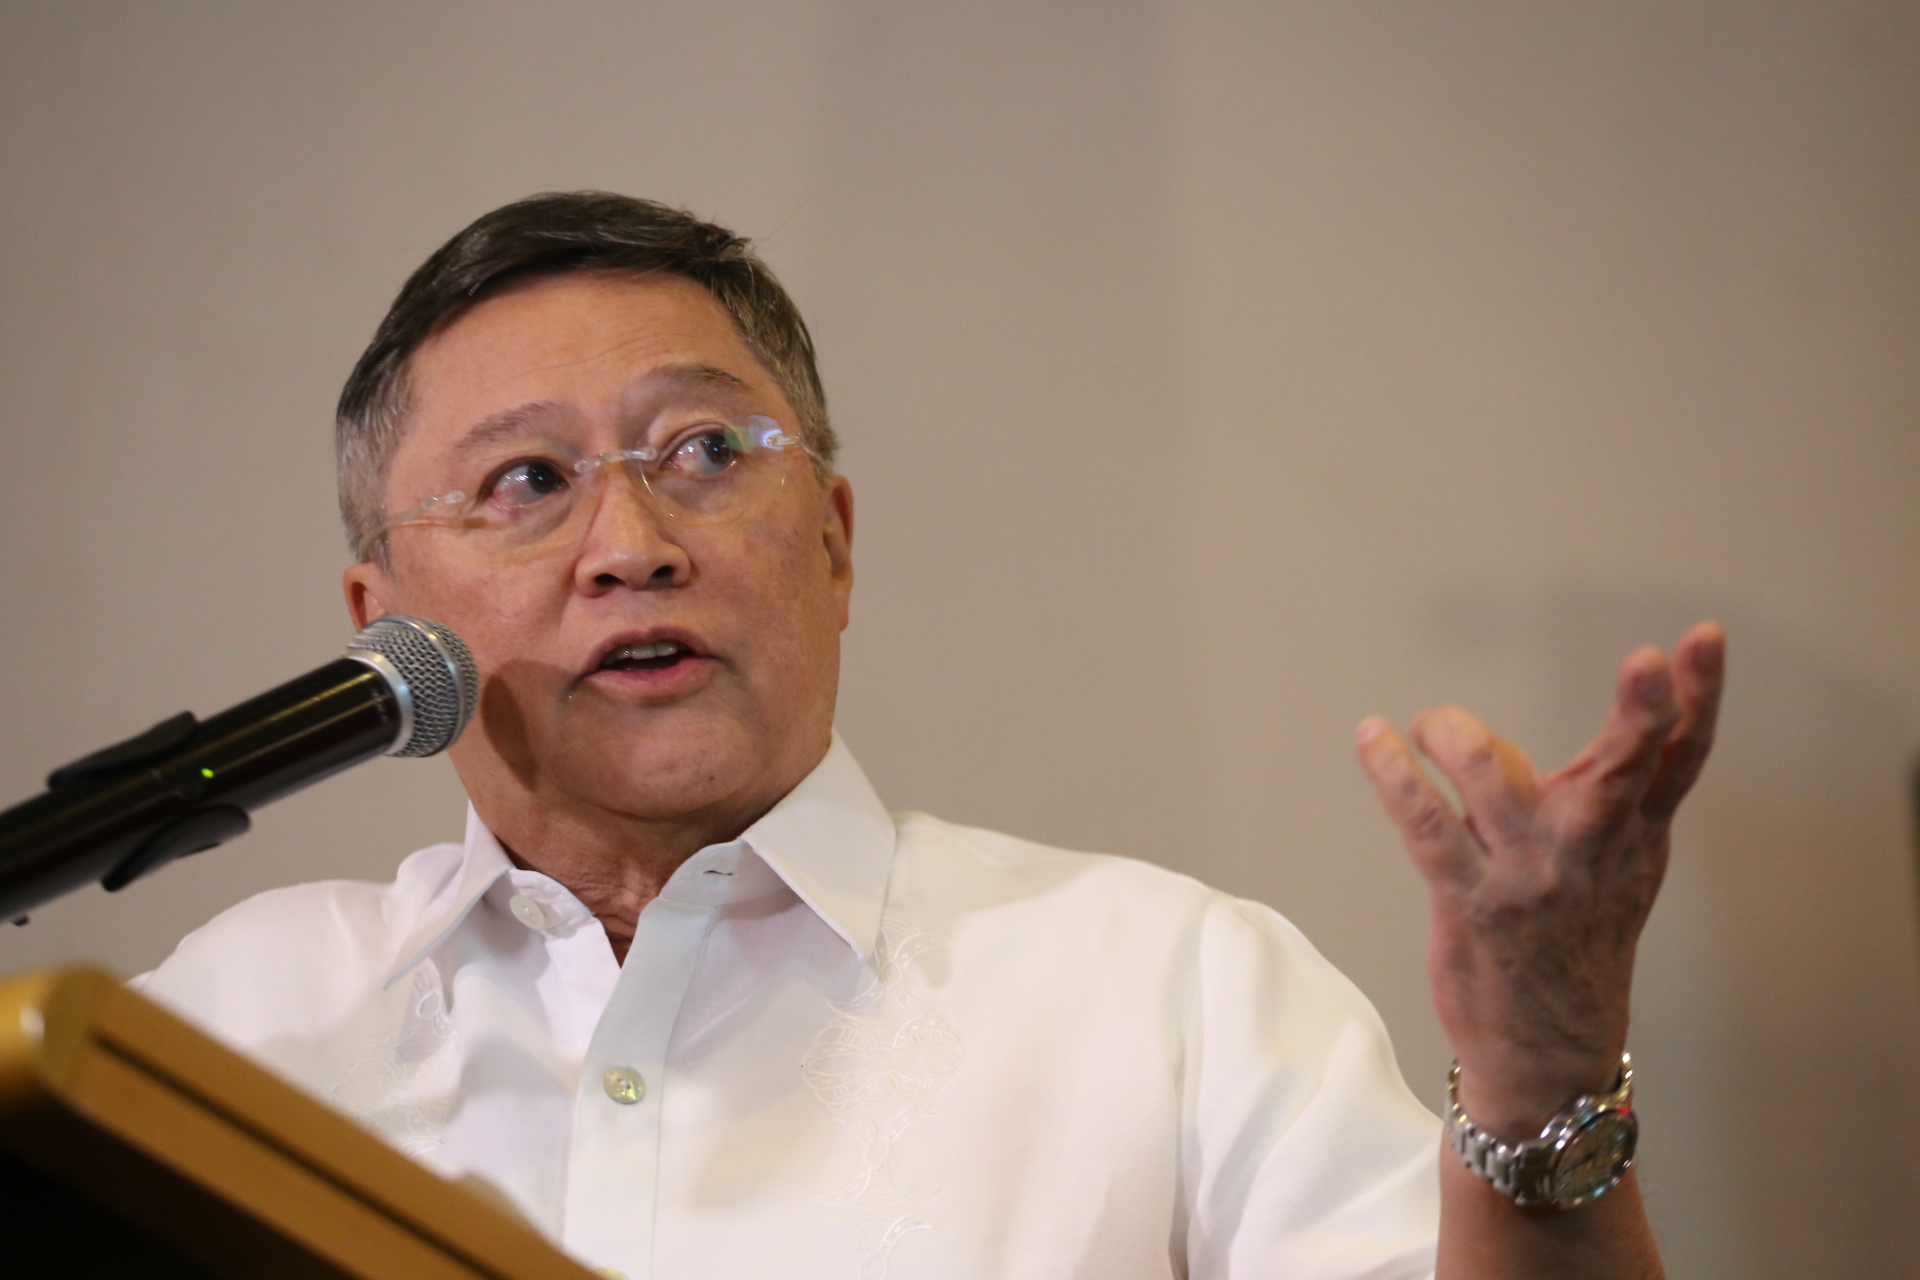 OUTLINING PLANS. Incoming Finance Secretary Carlos 'Sonny' Dominguez during a press conference in Davao City. File photo by Manman Dejeto/Rappler  